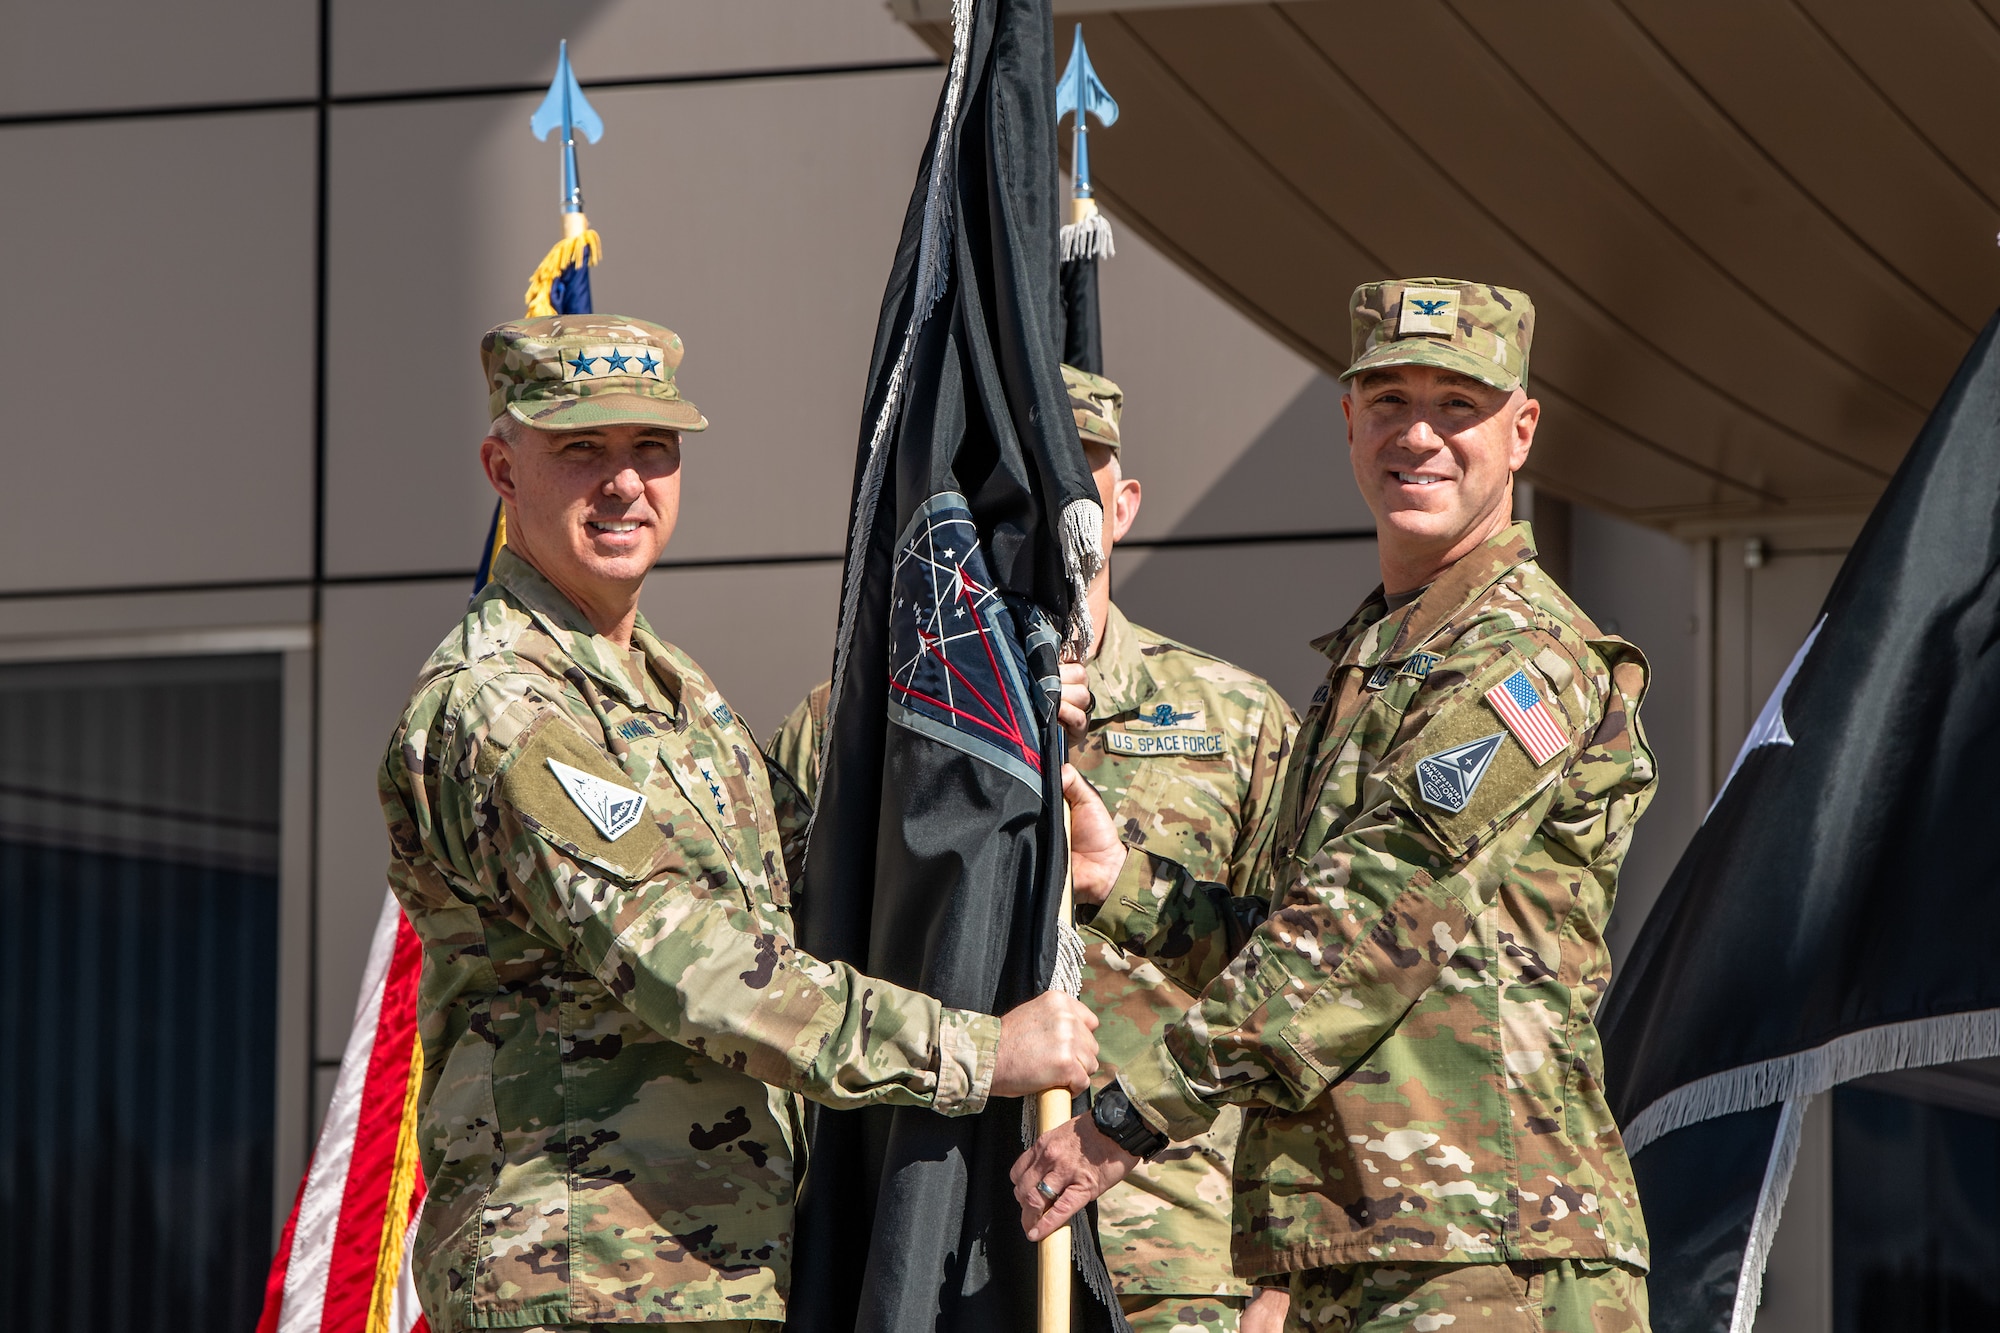 United States Space Force Lt. Gen. Stephen Whiting activated a new PNT Delta. USSF Col. Andrew Menschner assumed command of the new delta. The ceremony also consisted of a patching moment where the members of the new delta applied their new patches to their uniforms.